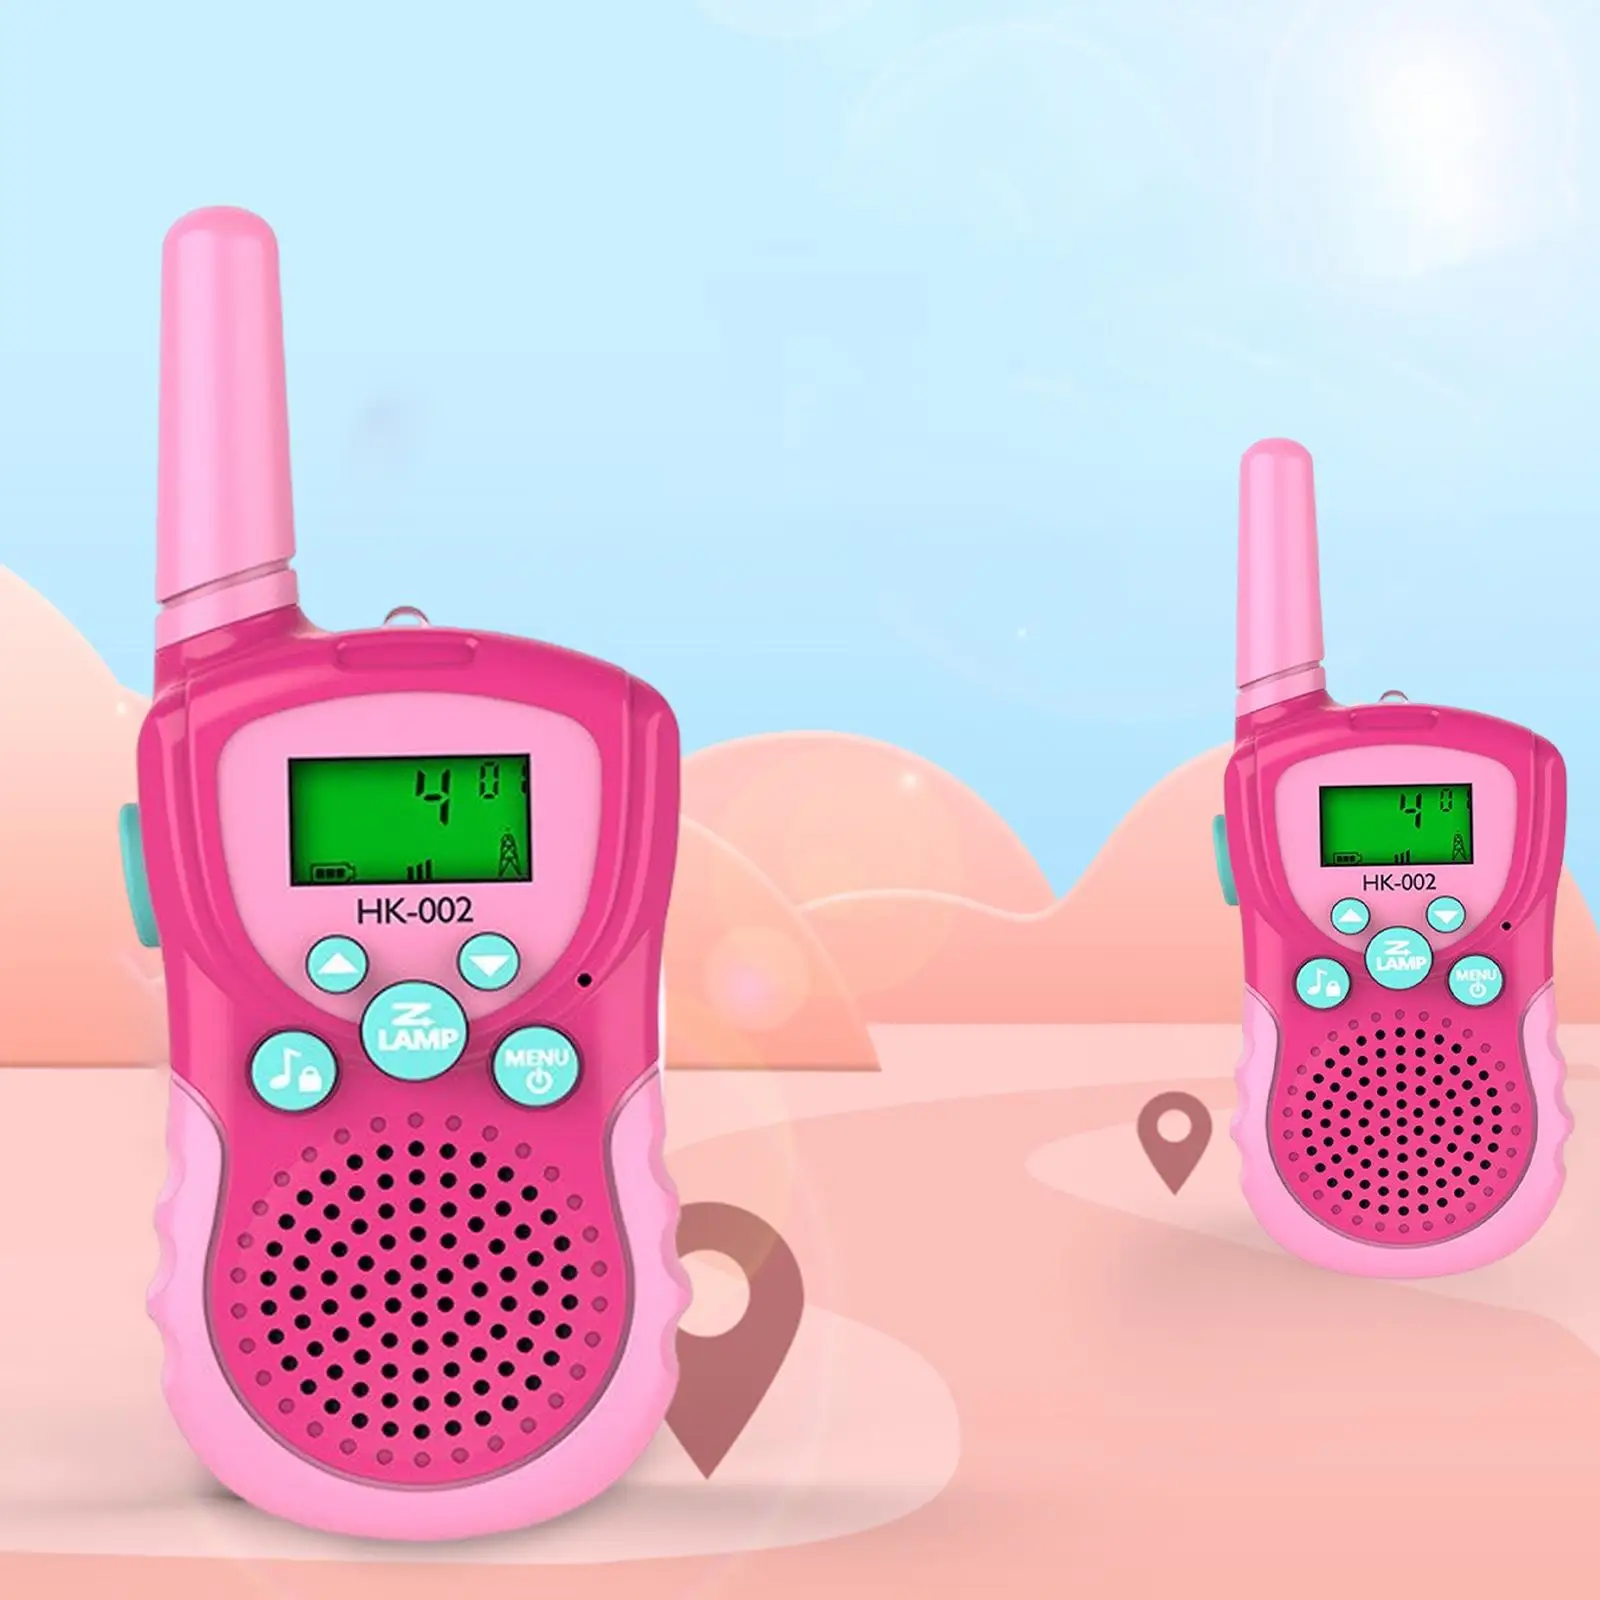 2 Pieces Walkie Talkies for Kids Walky Talky Toy for 3-14 Years Old Hiking